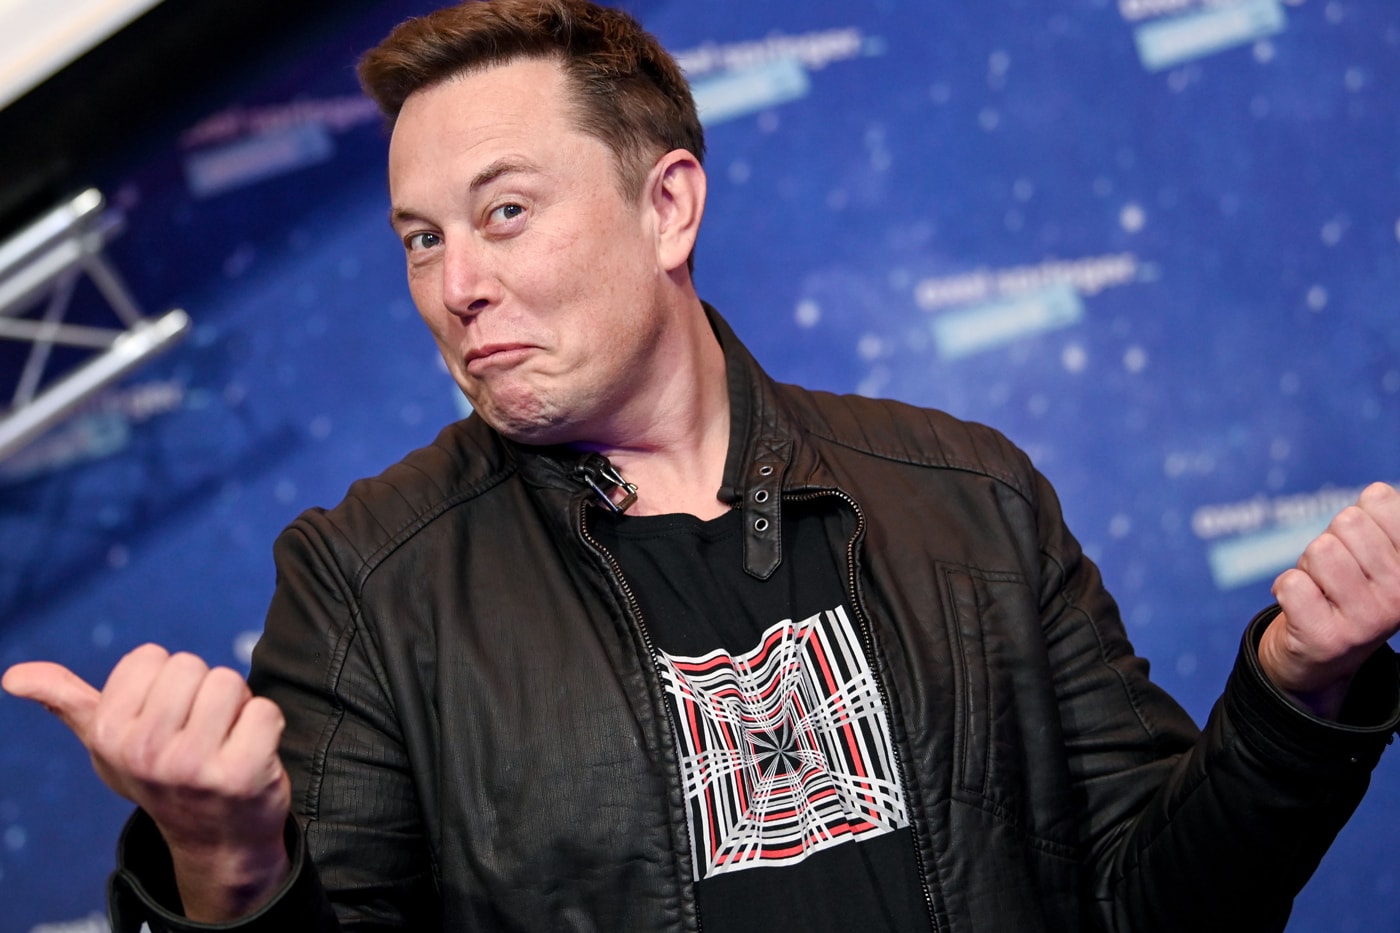 Elon Musk Announces He Has Found a New CEO for Twitter linda yaccarino nbcuniversal chair of global advertising and partnership x spacex 